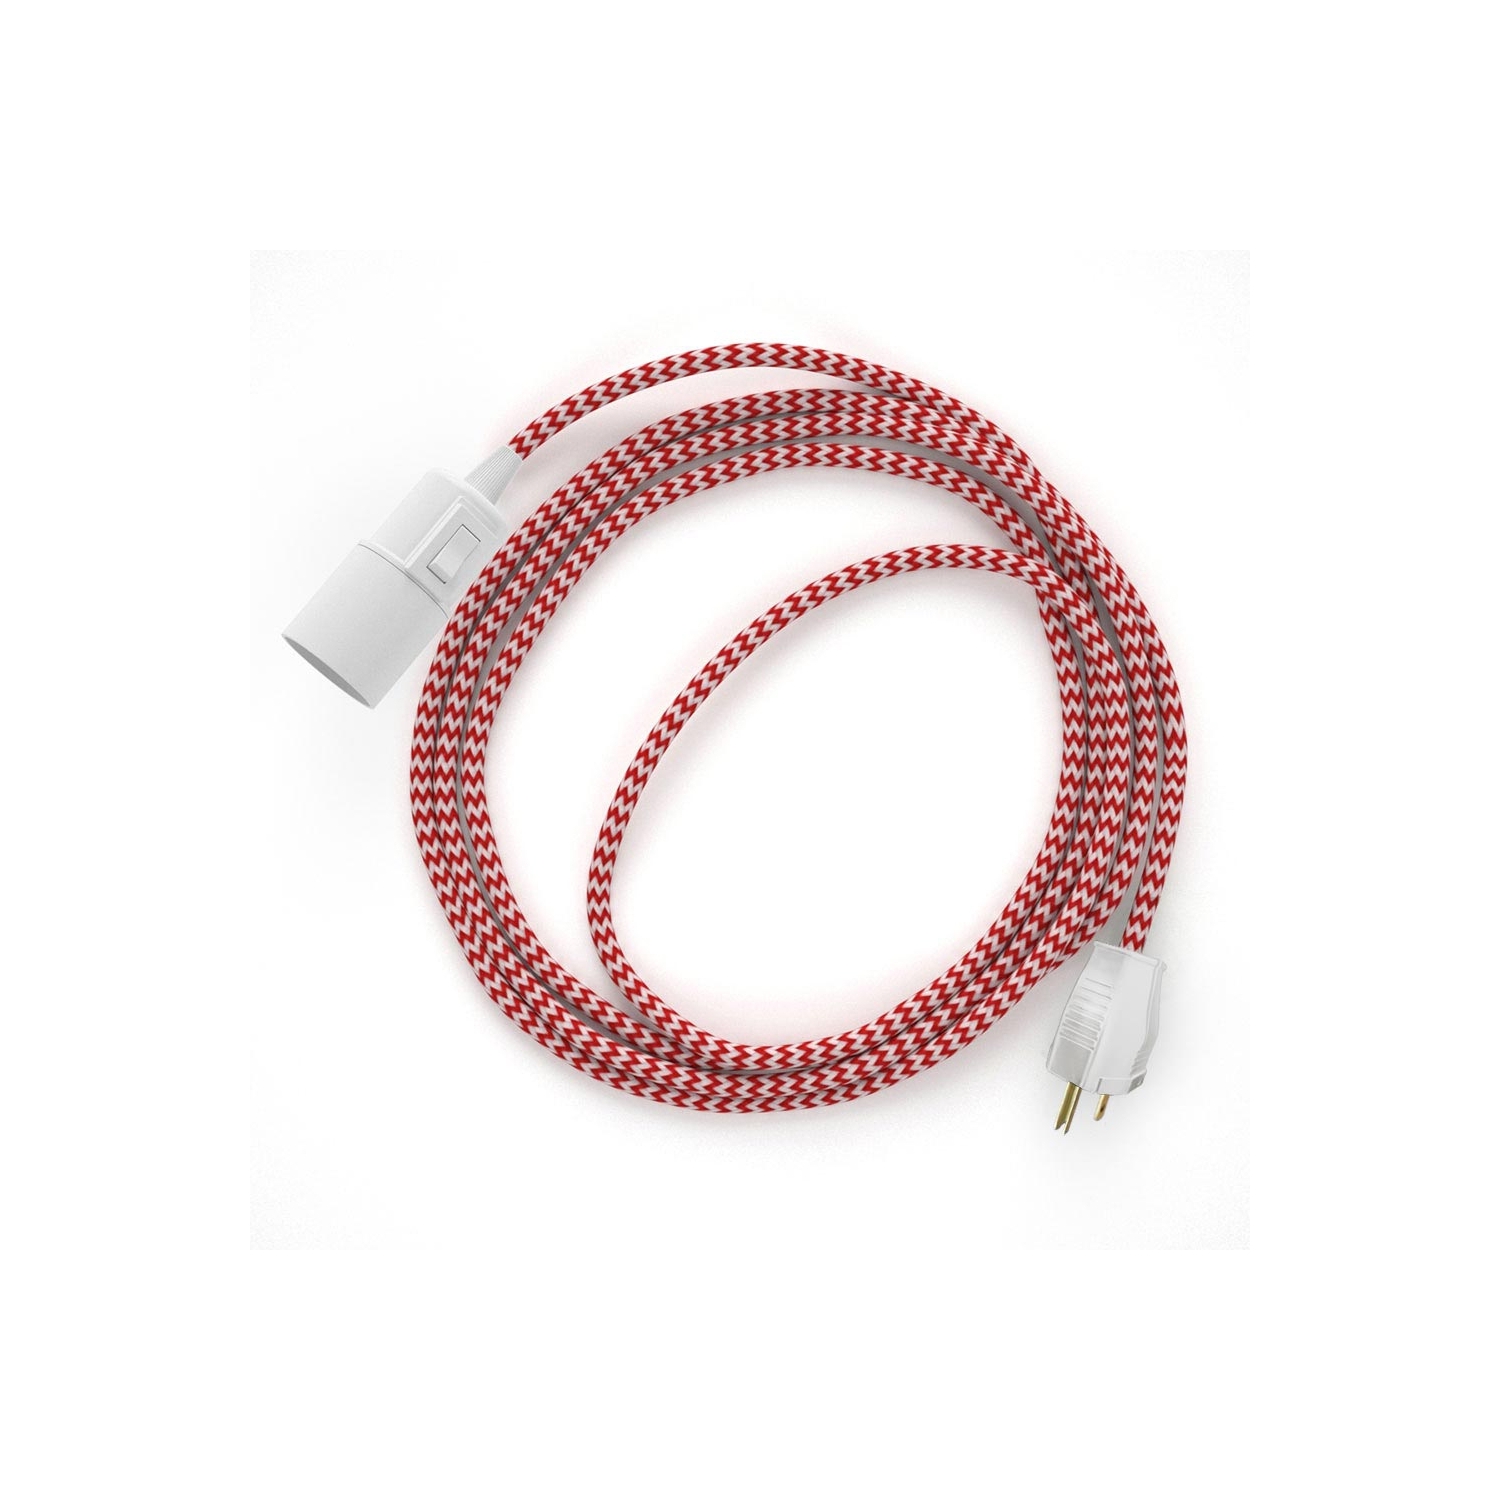 Plug-in Pendant with switch on socket | RZ09 Red & White Chevron